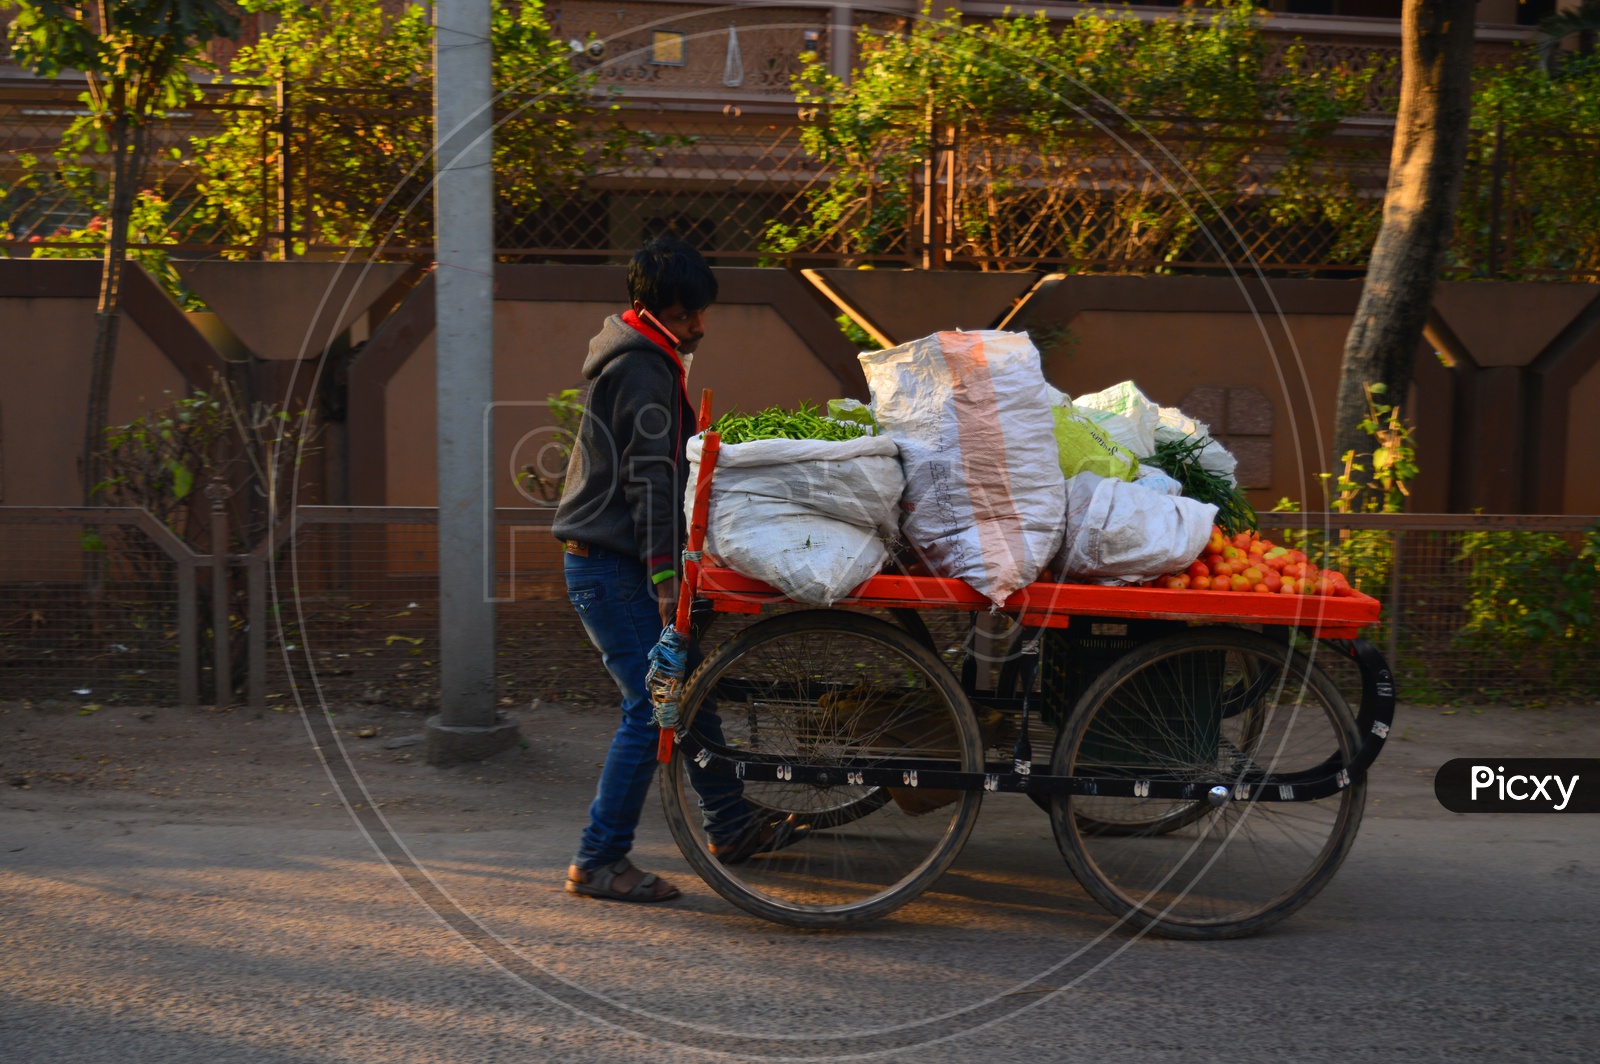 A vegetable vendor carrying his cart on road